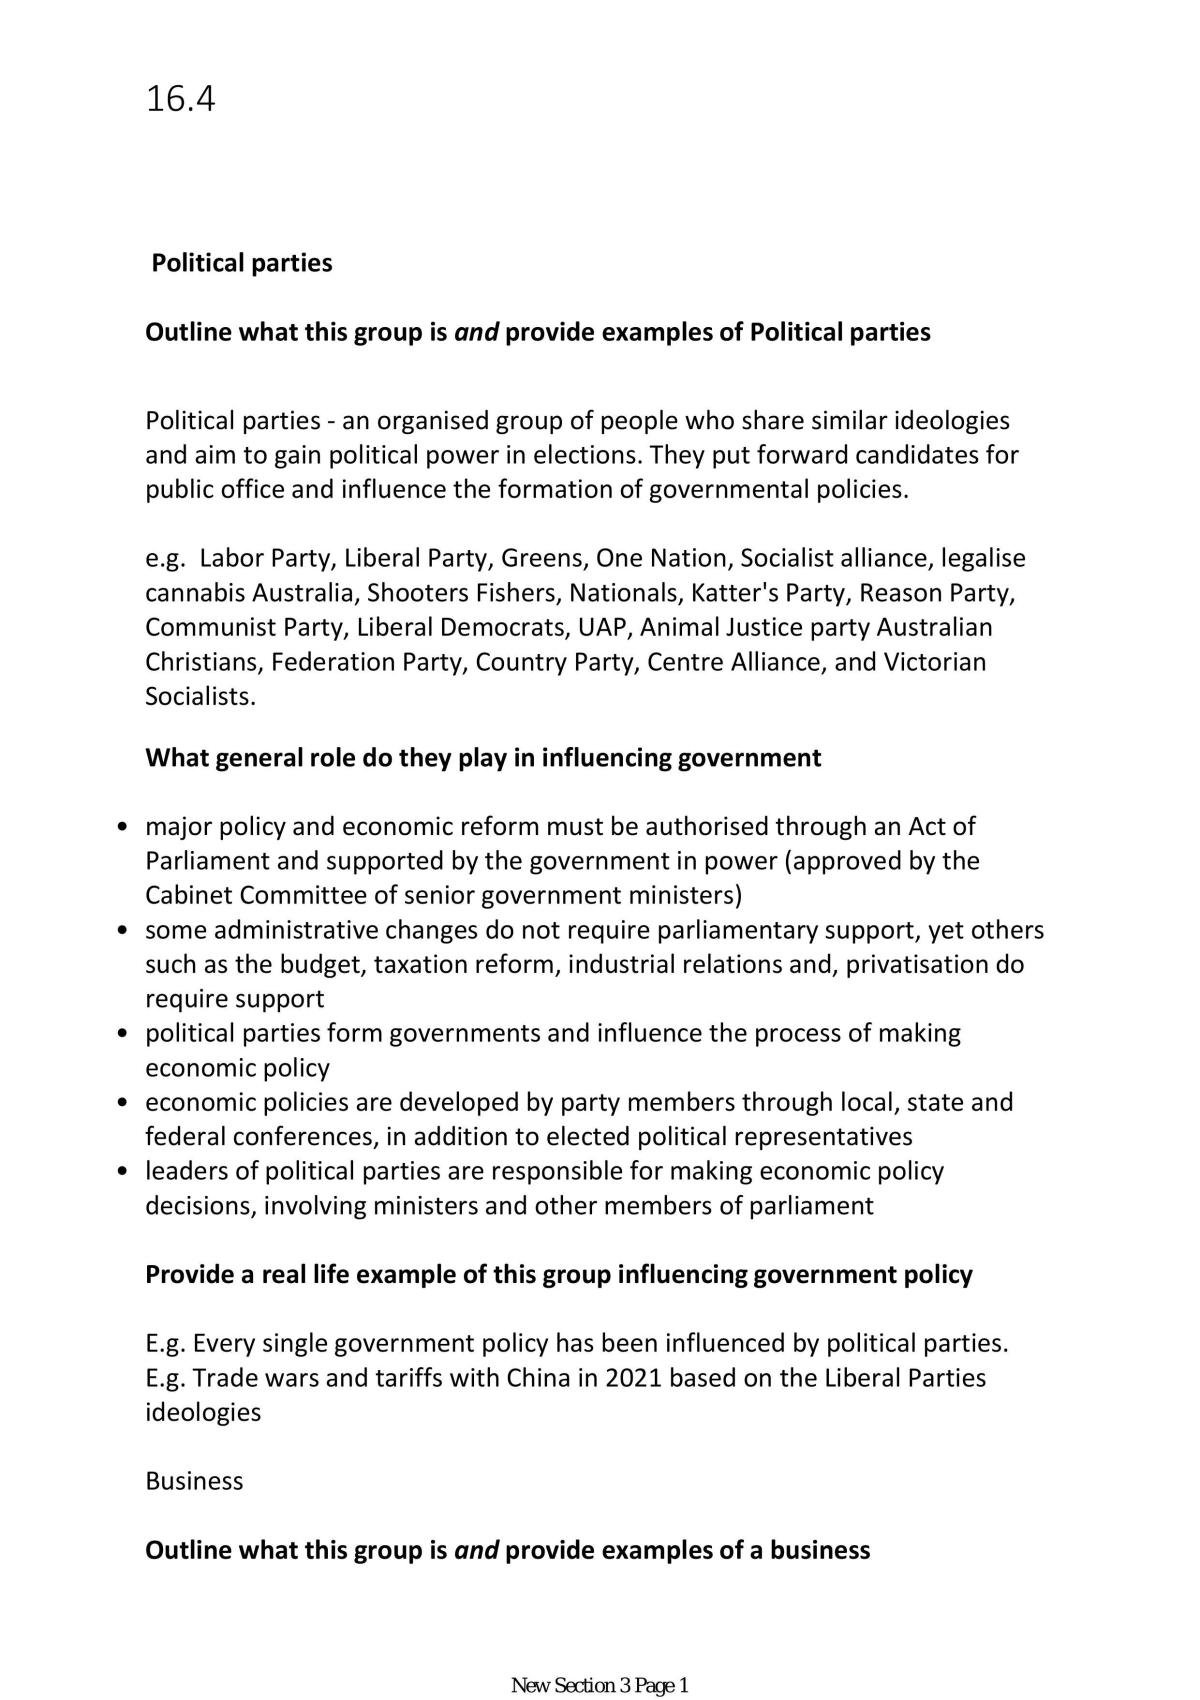 16.4 Influence on Government Policies in Australia - Page 1